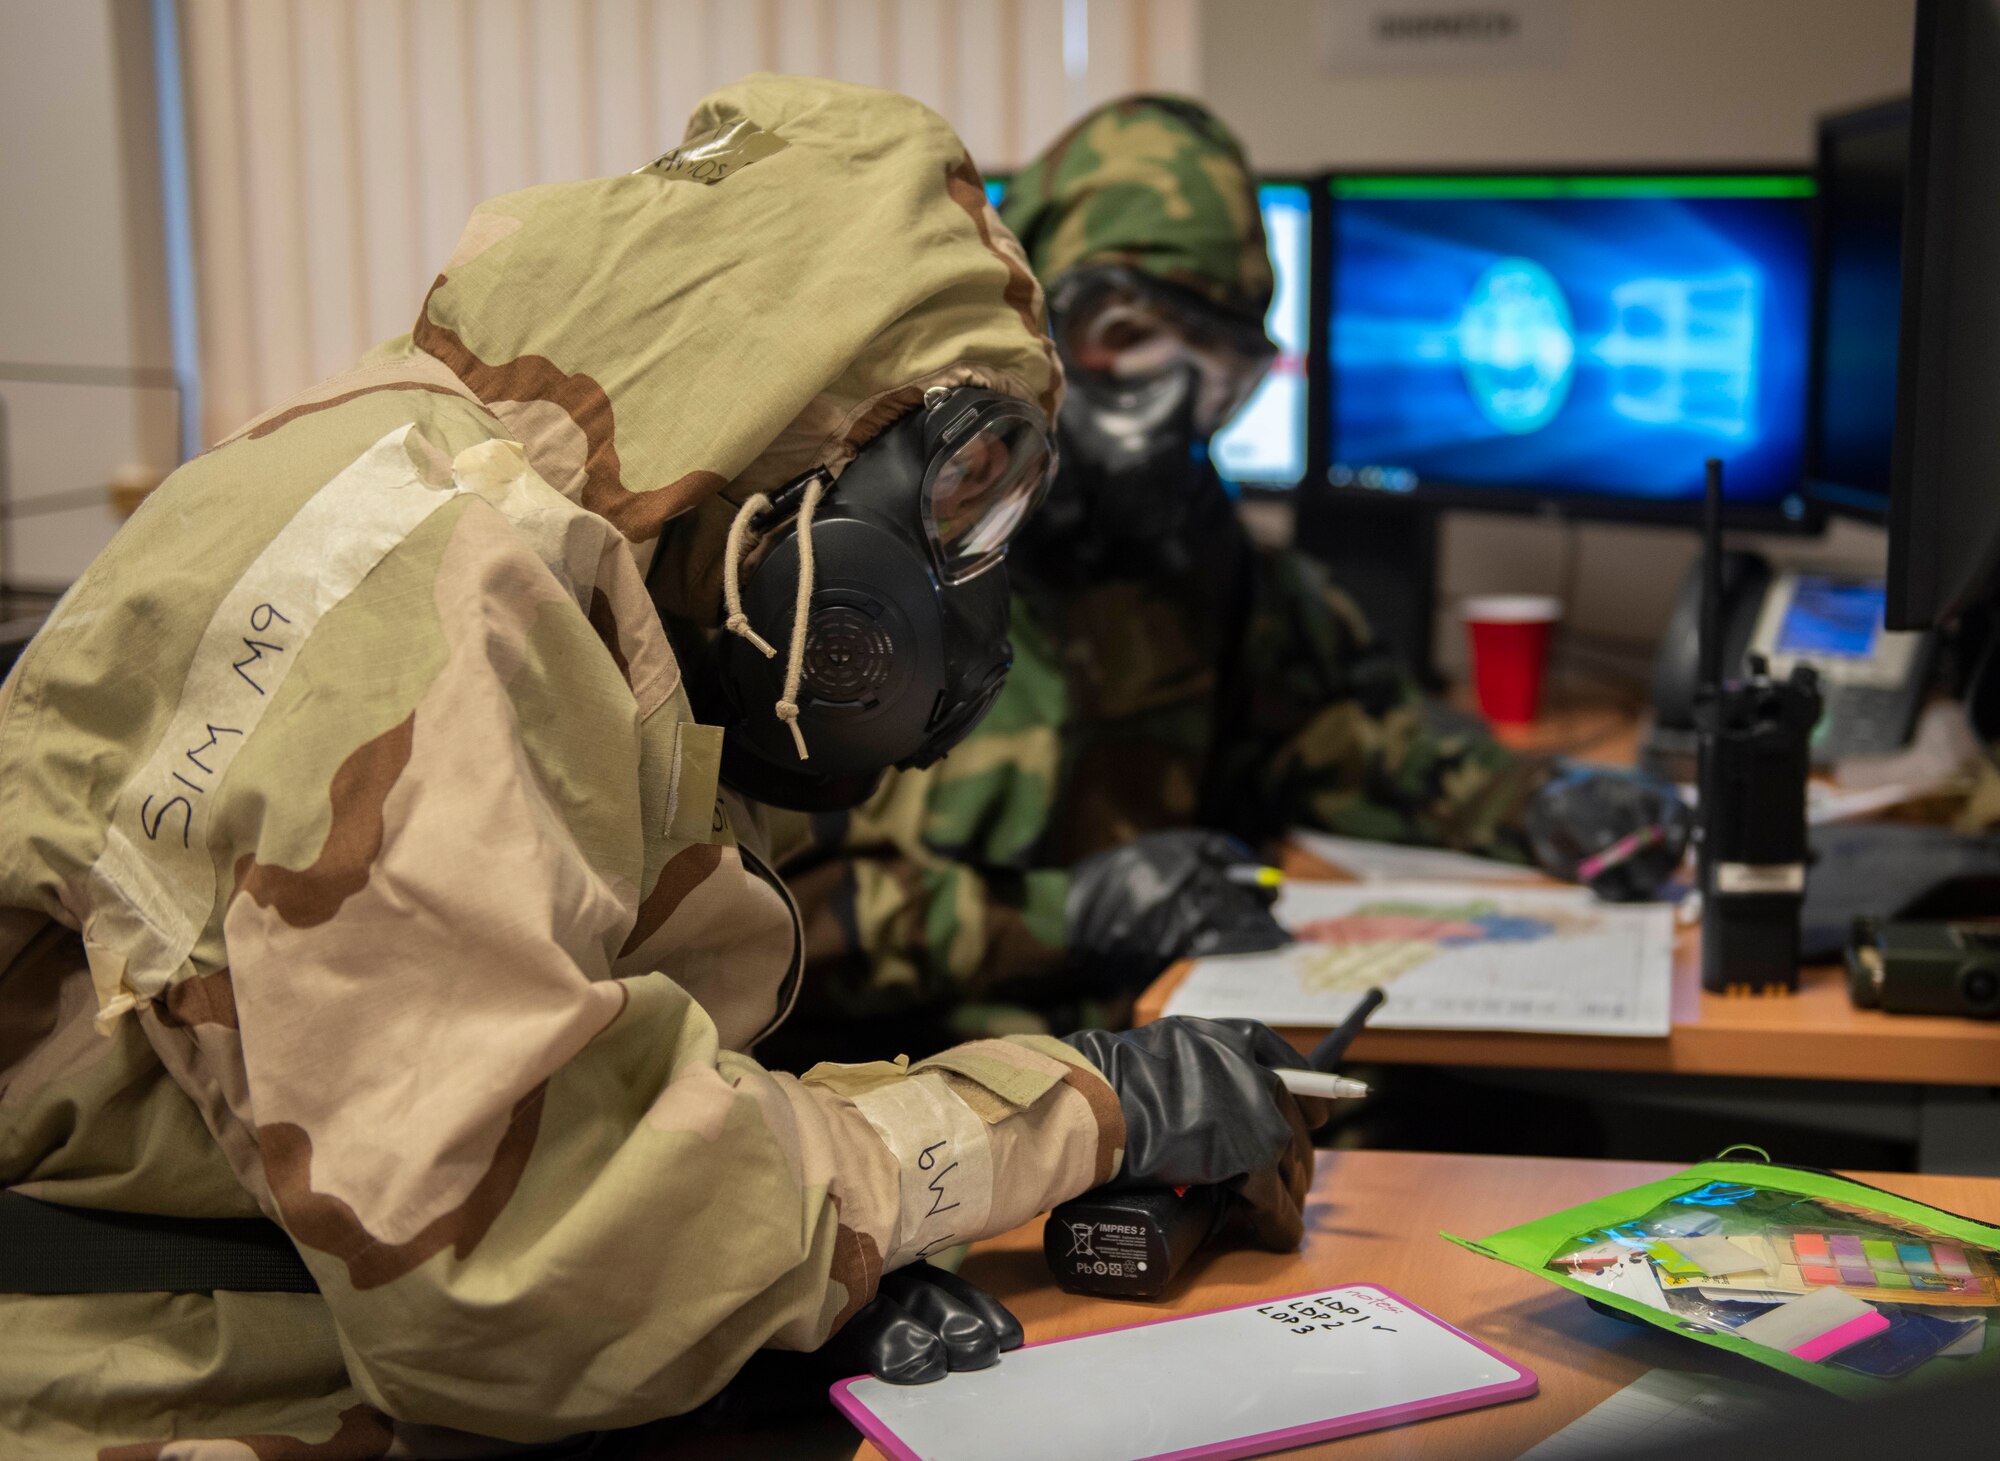 A 100th Air Refueling Wing Airman in chemical, biological, radiological, nuclear and explosive protective gear plans cordon procedures during a readiness exercise at RAF Mildenhall, England, Feb. 10, 2020. The exercise was performed to test the Bloody Hundredth and sharpen their response and readiness abilities. (U.S. Air Force photo by Staff Sgt. Luke Milano)